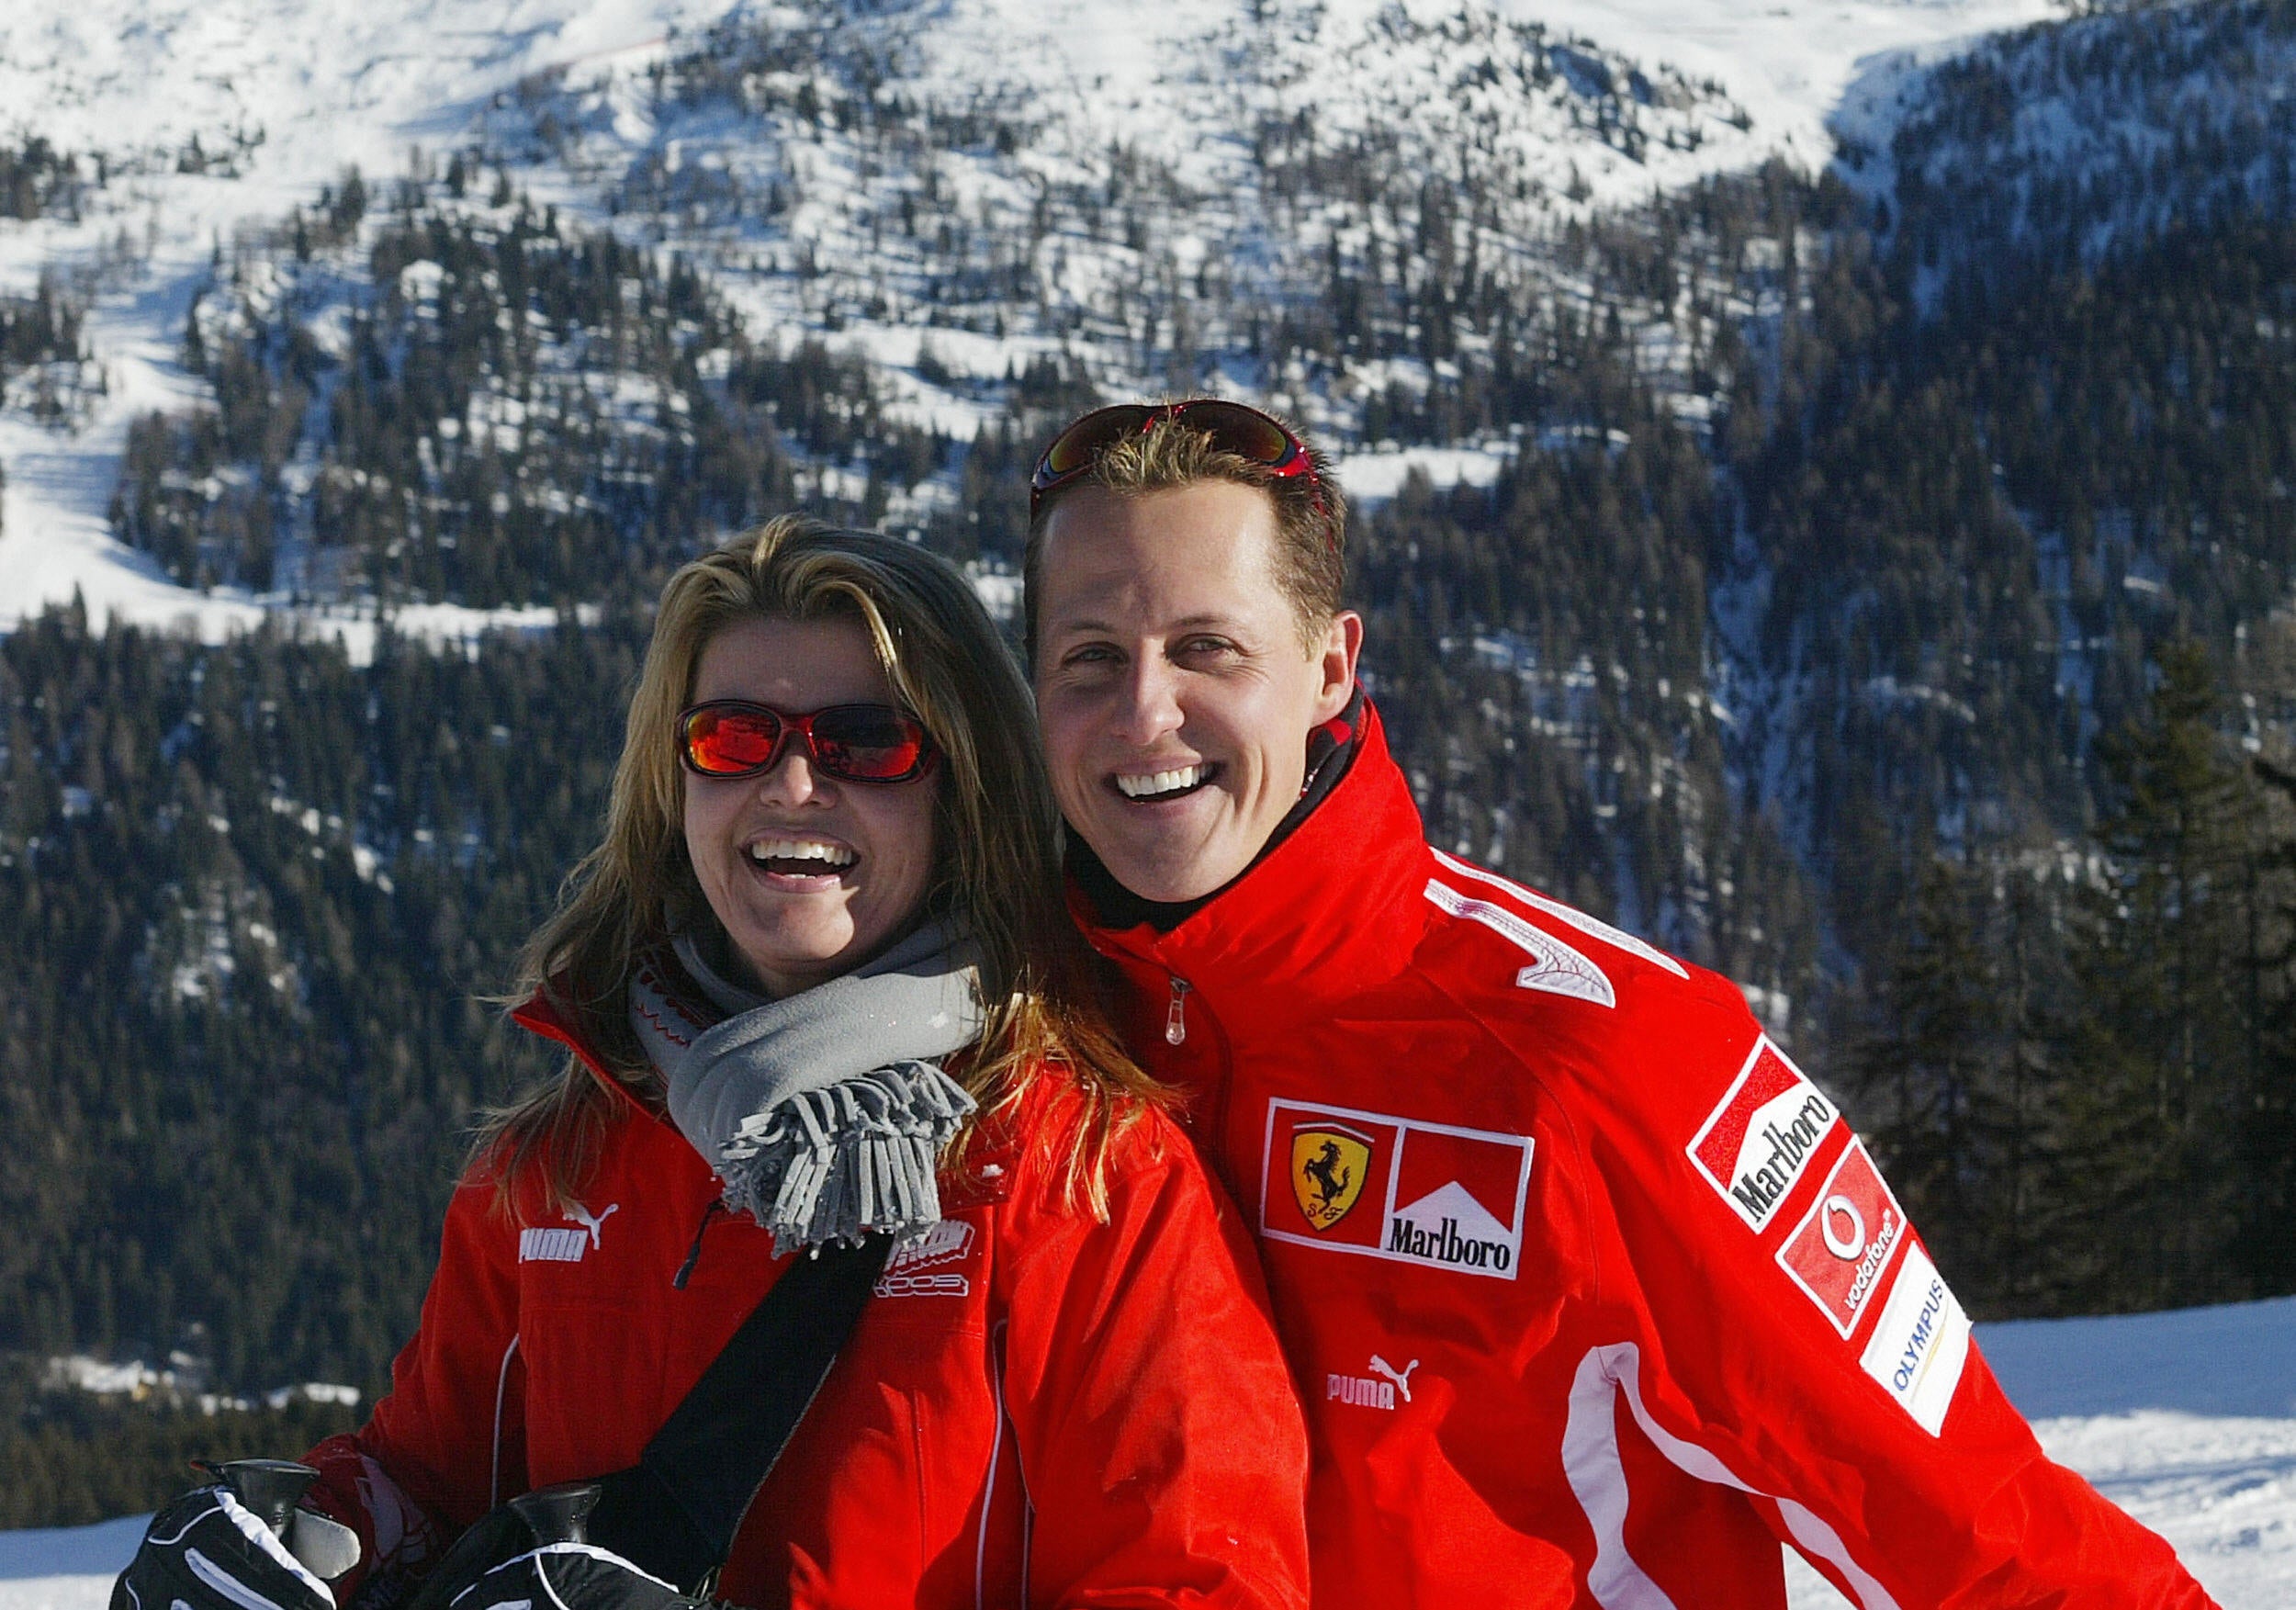 Schumacher has not been seen publicly since December 2013, with his wife Corinna insisting on protecting his privacy